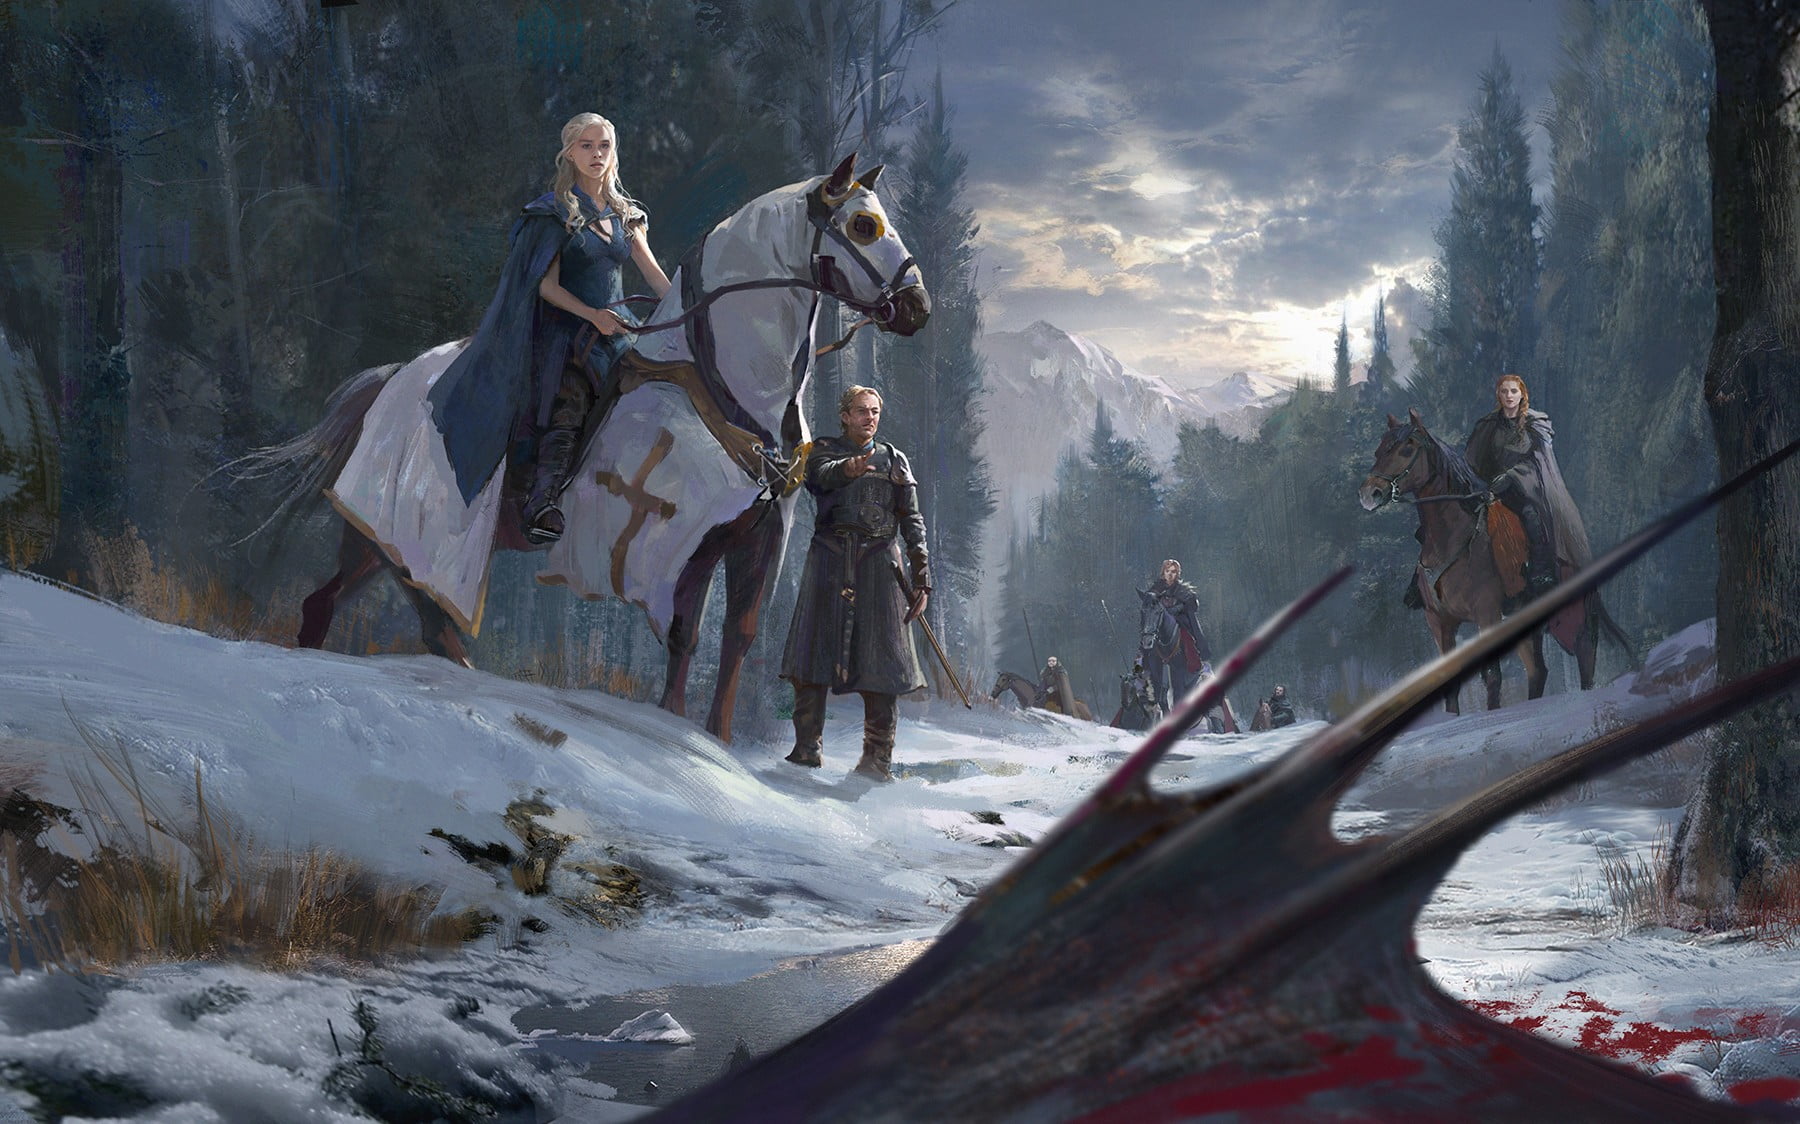 game of thrones wallpaper hd,action adventure game,pc game,screenshot,cg artwork,fictional character